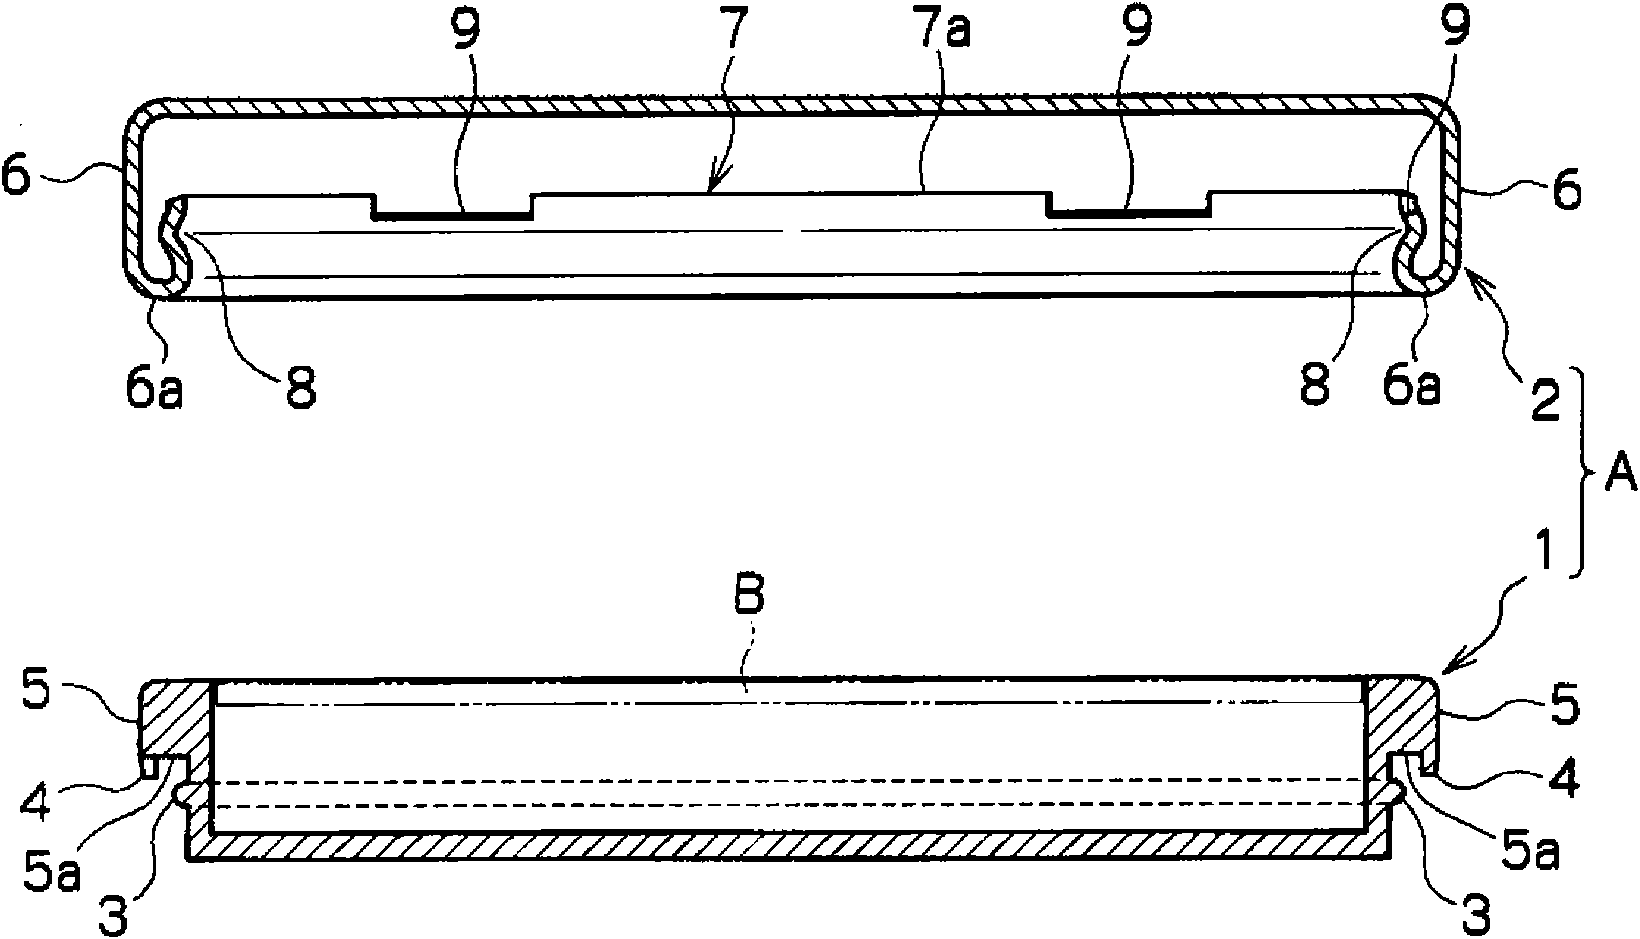 Packaging case for electro-optical device product, and its manufacturing method